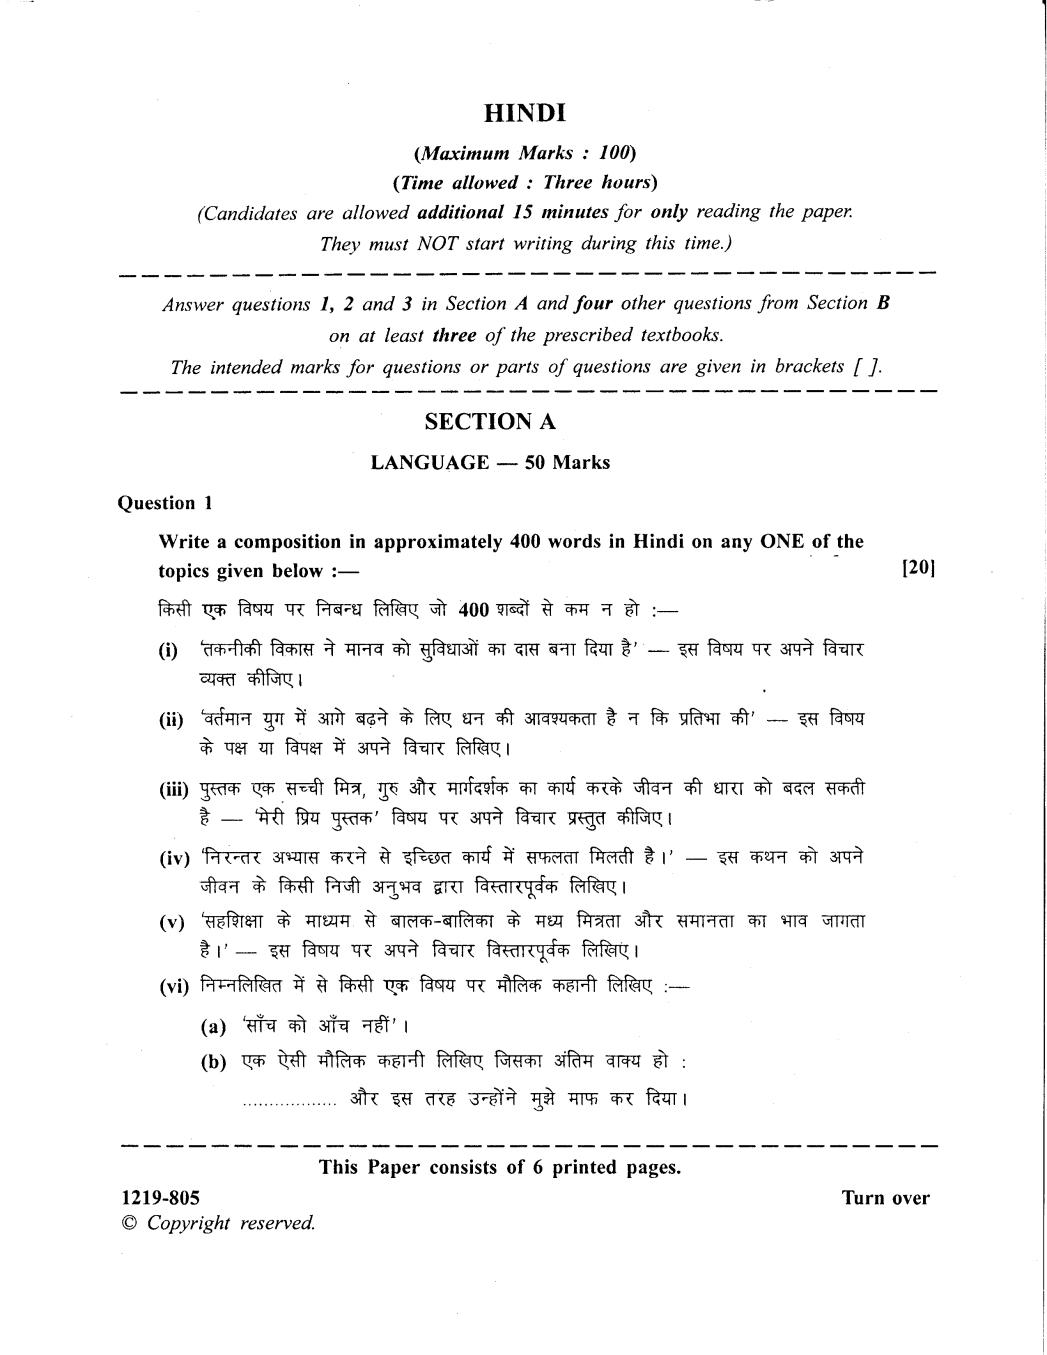 ISC Class 12 Question Paper 2019 for Hindi  - Page 1